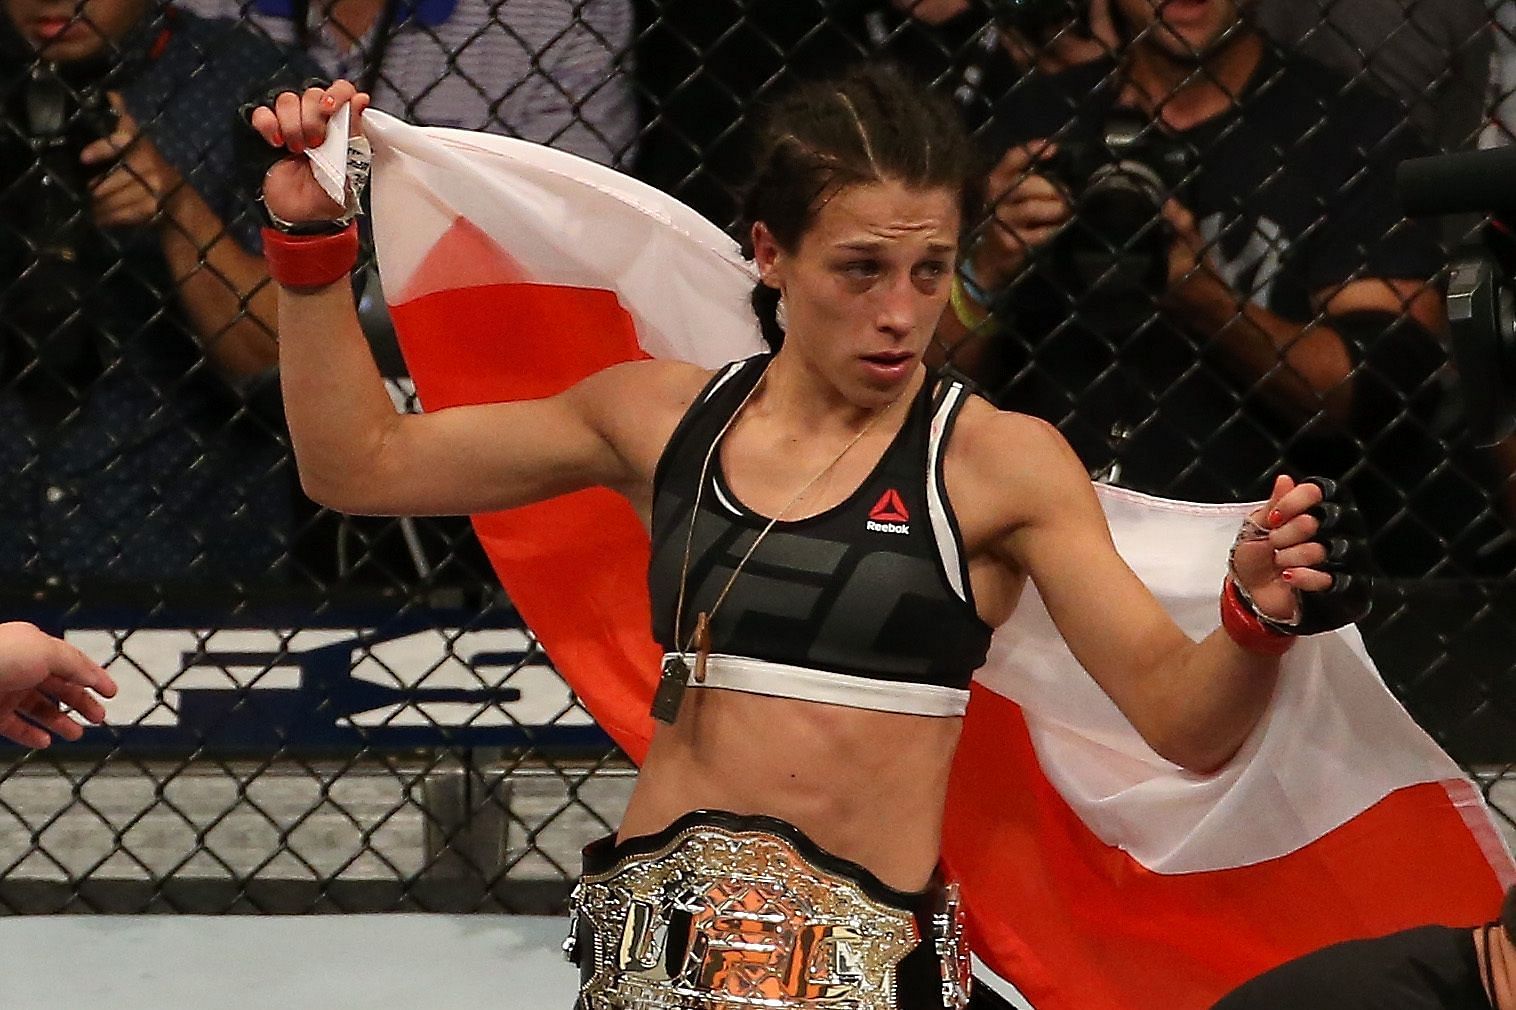 After her loss this weekend, Joanna Jedrzejczyk was never likely to regain the UFC strawweight title